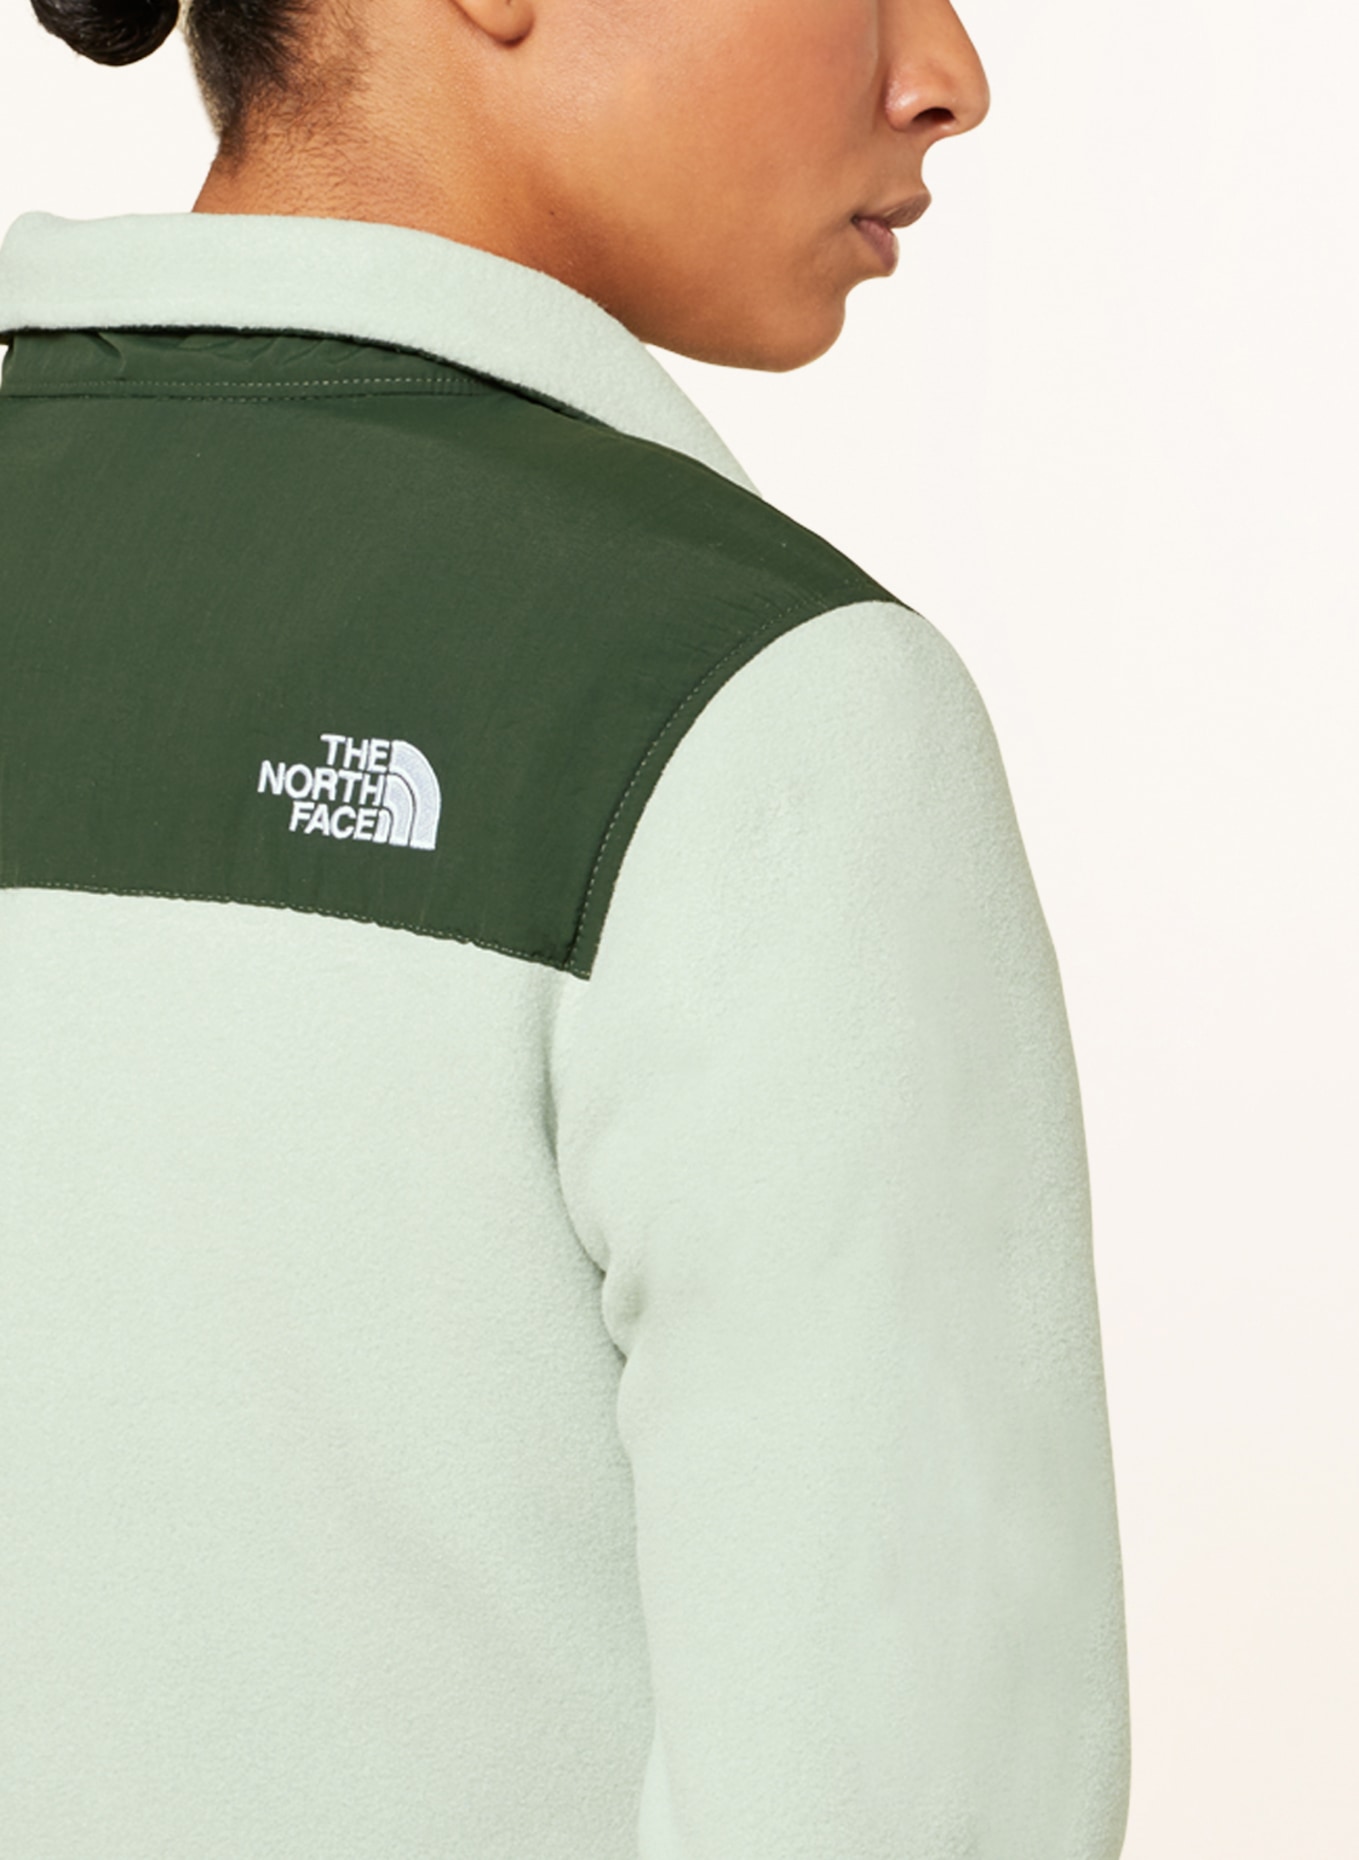 THE NORTH FACE Cropped anorak jacket DENALI in mixed materials, Color: MINT/ DARK GREEN (Image 4)